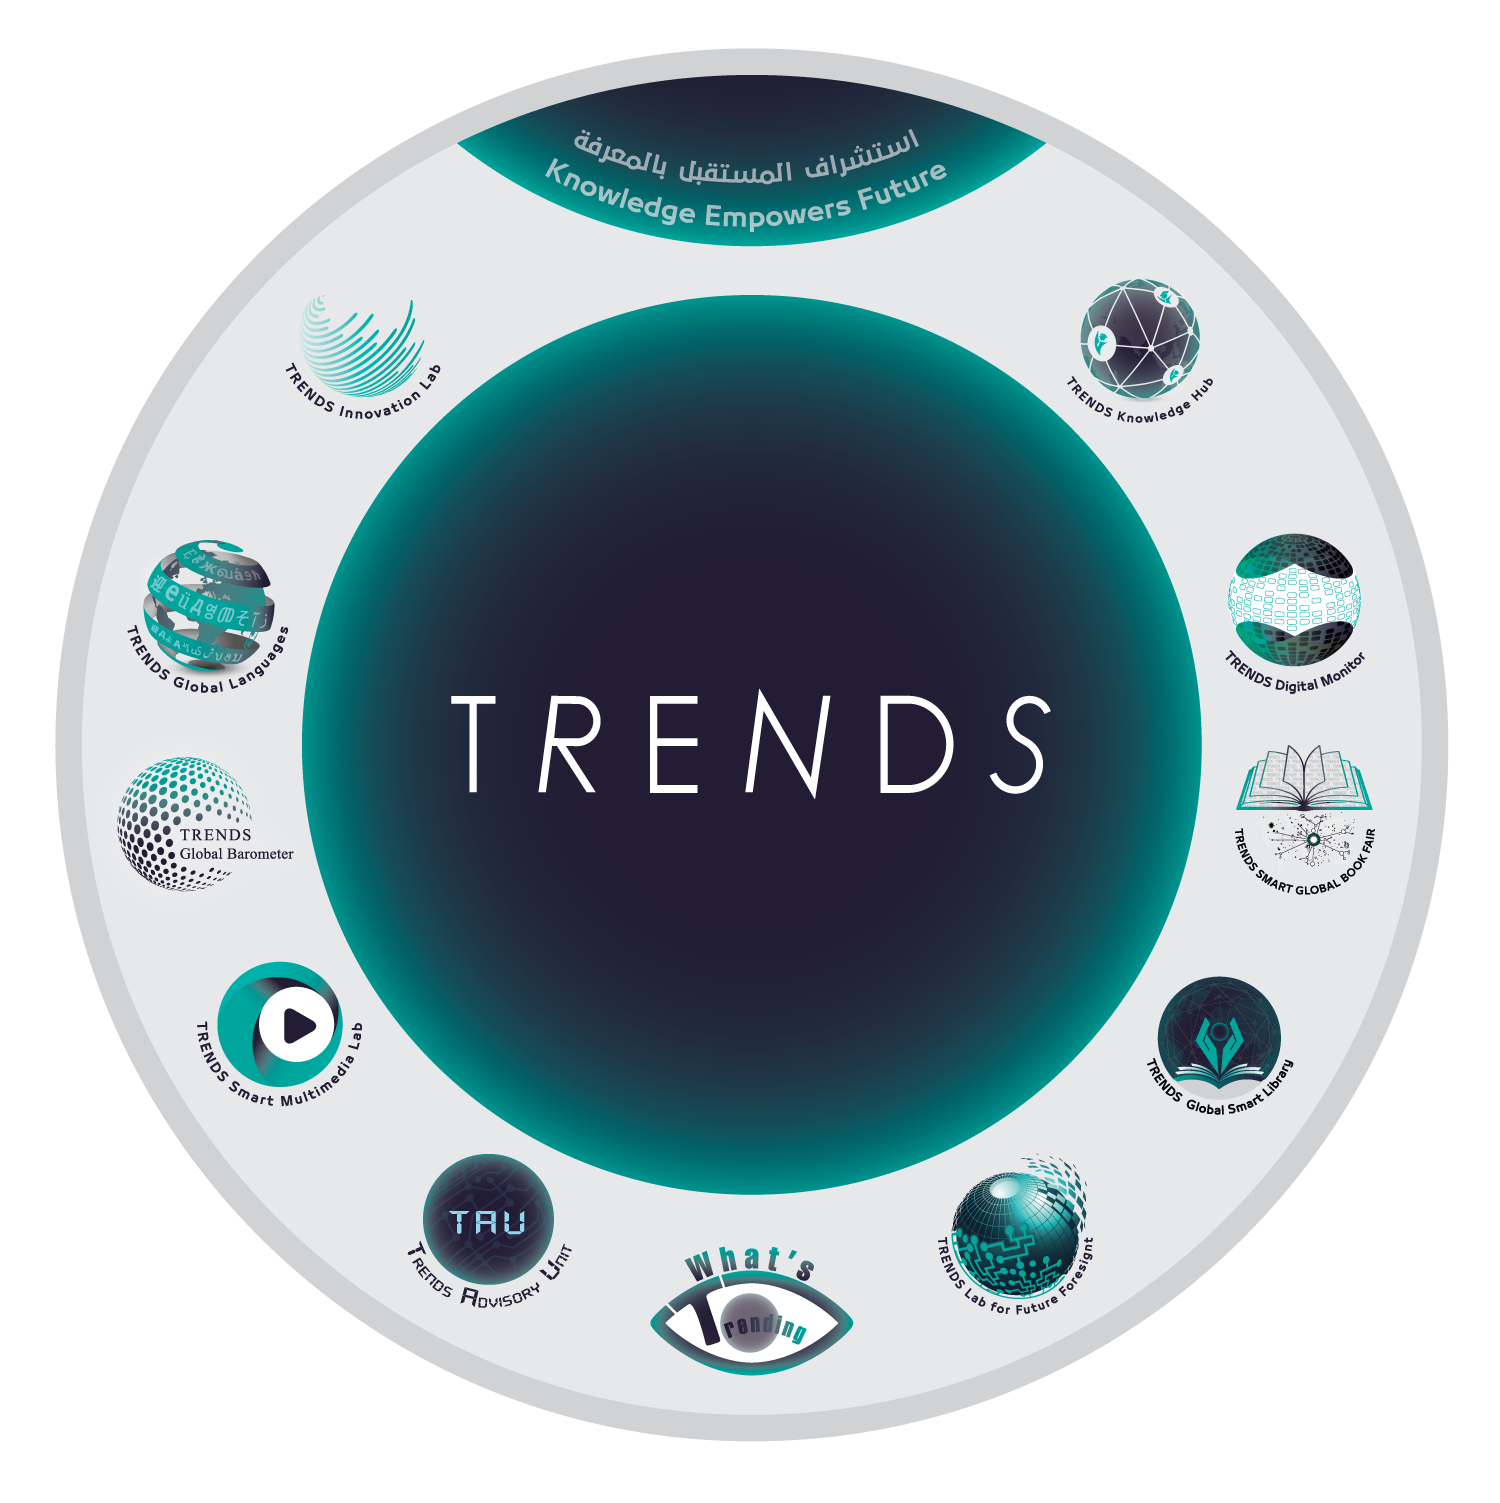 Trends Research & Advisory